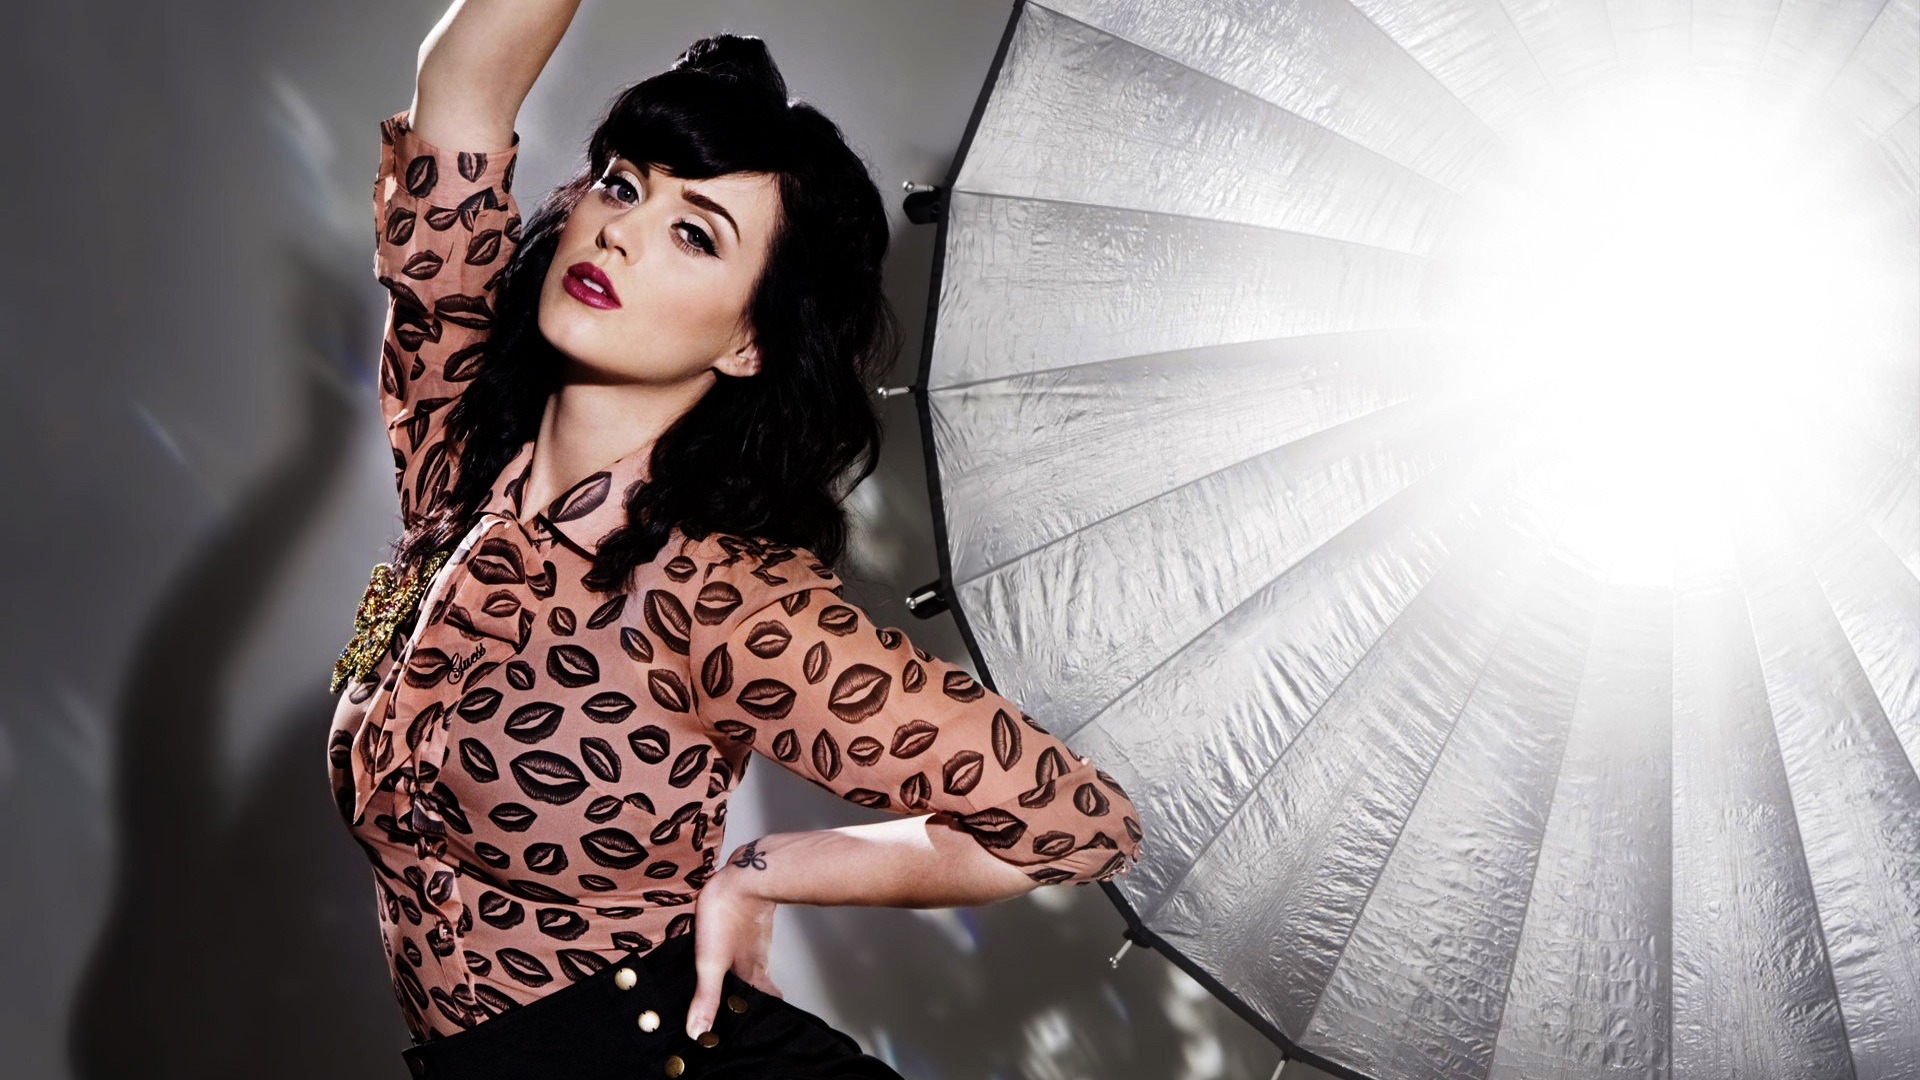 Katy Perry Photo Session for 1920 x 1080 HDTV 1080p resolution